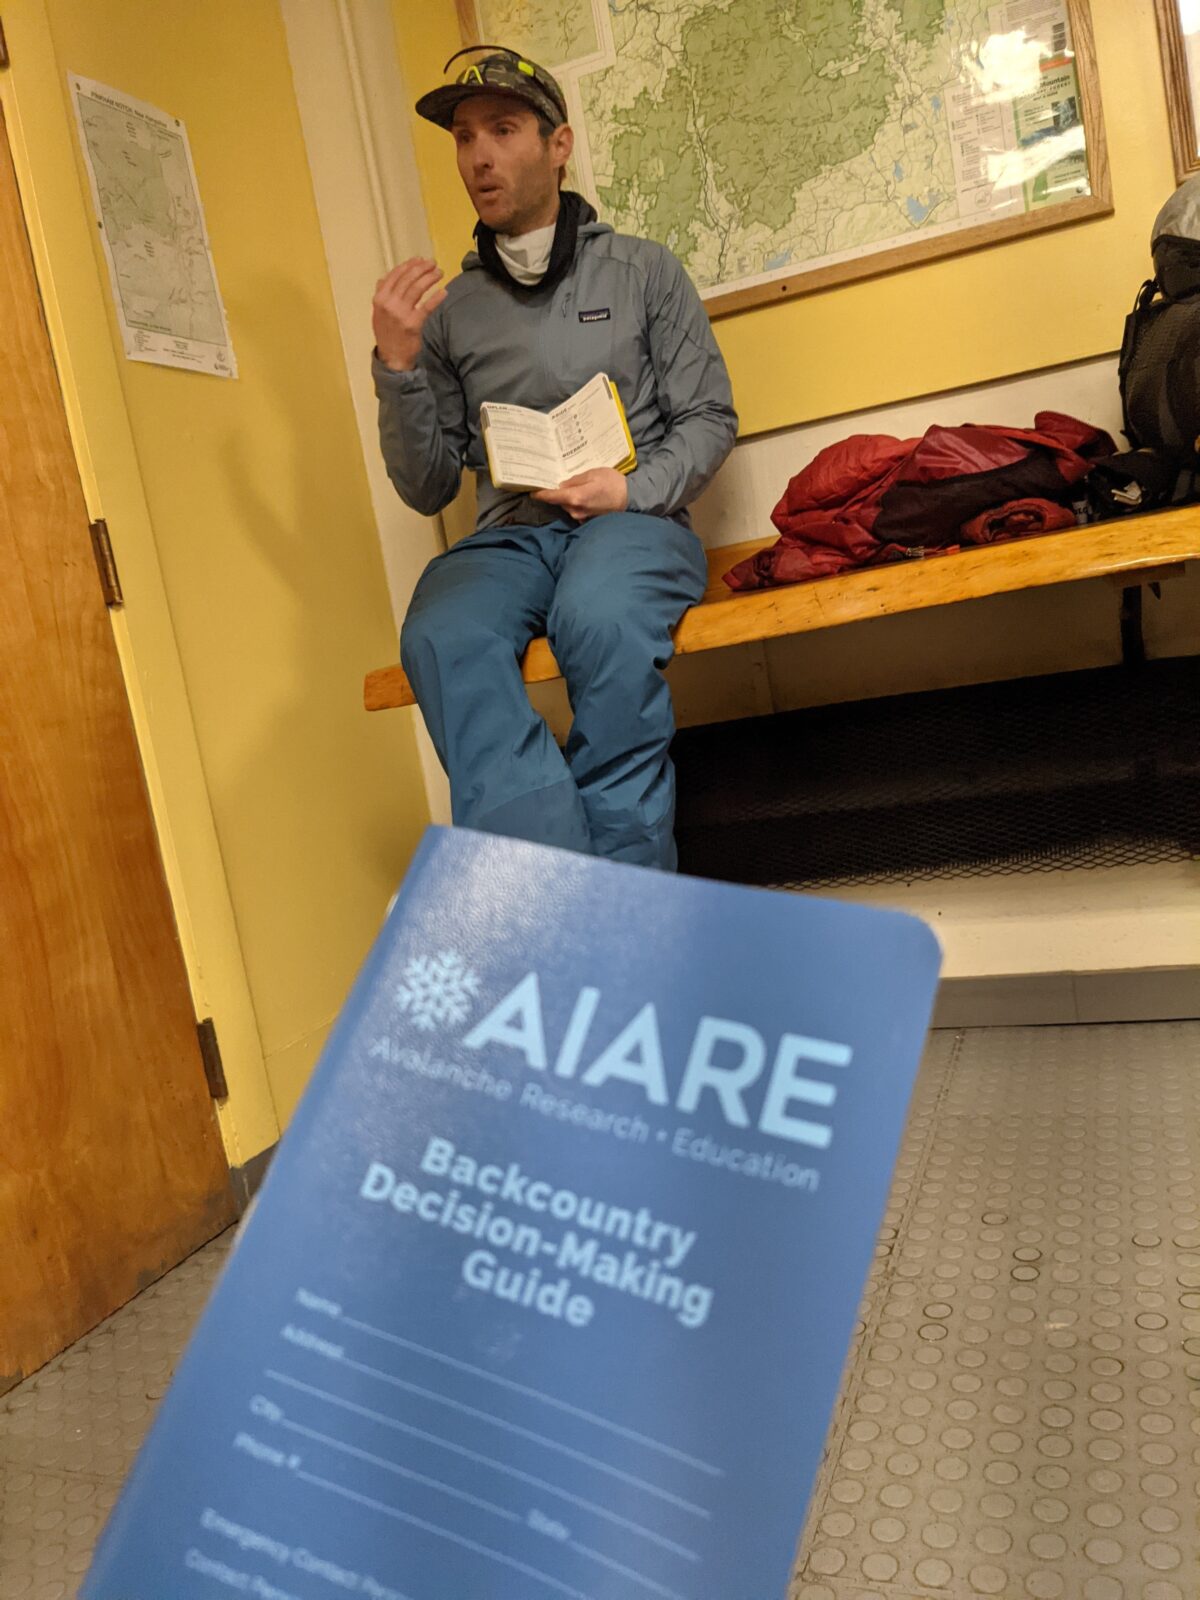 AIARE Backcountry decision-making guide